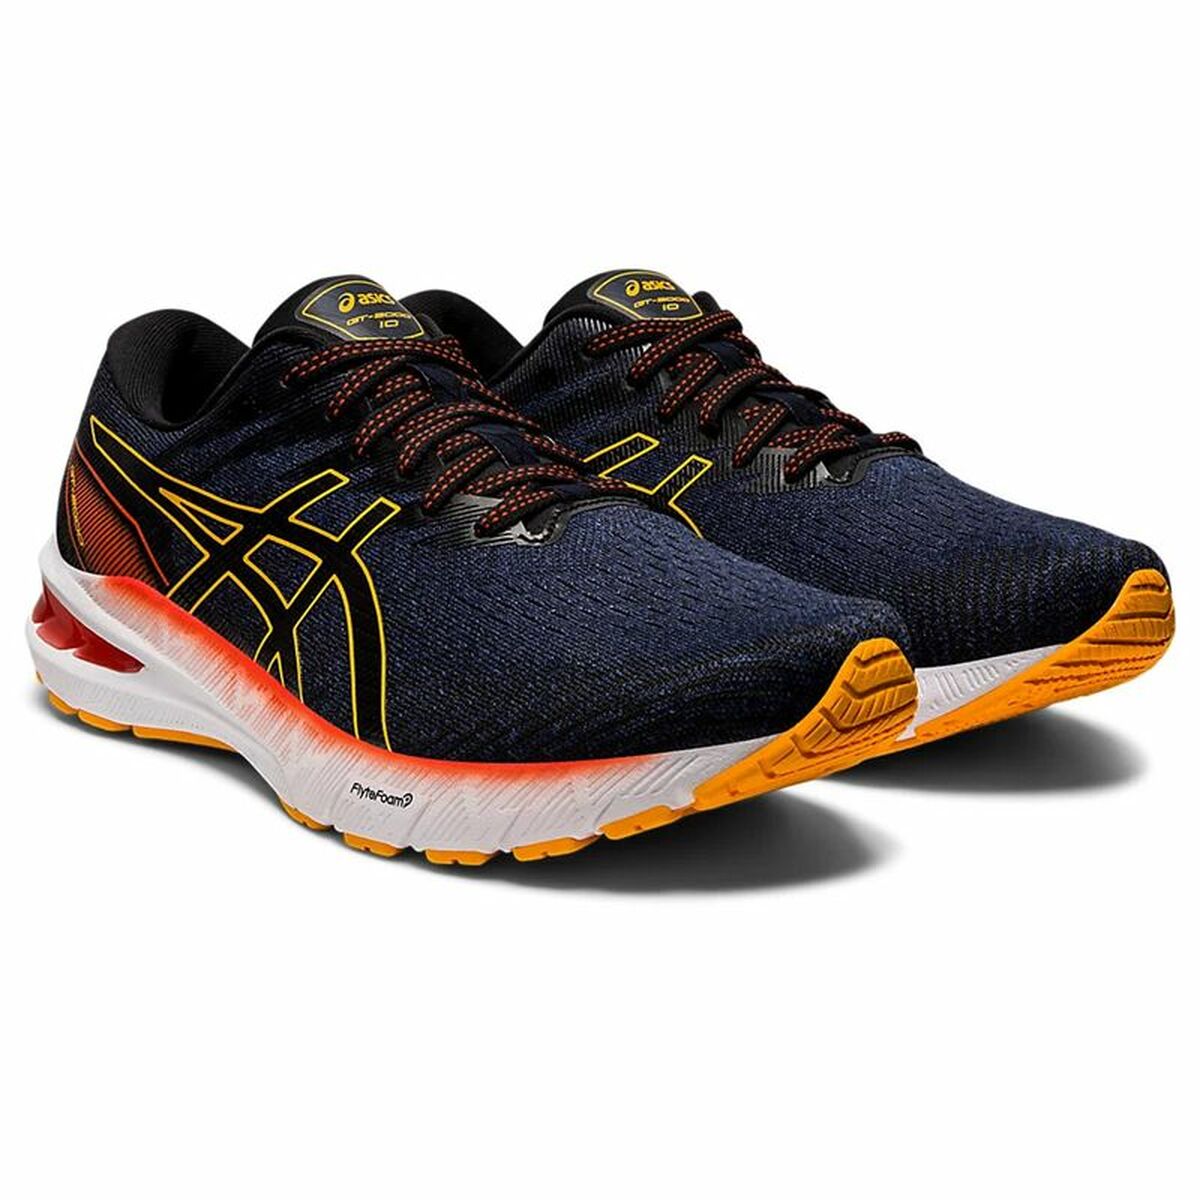 Running Shoes for Adults Asics GT-2000 10 Black